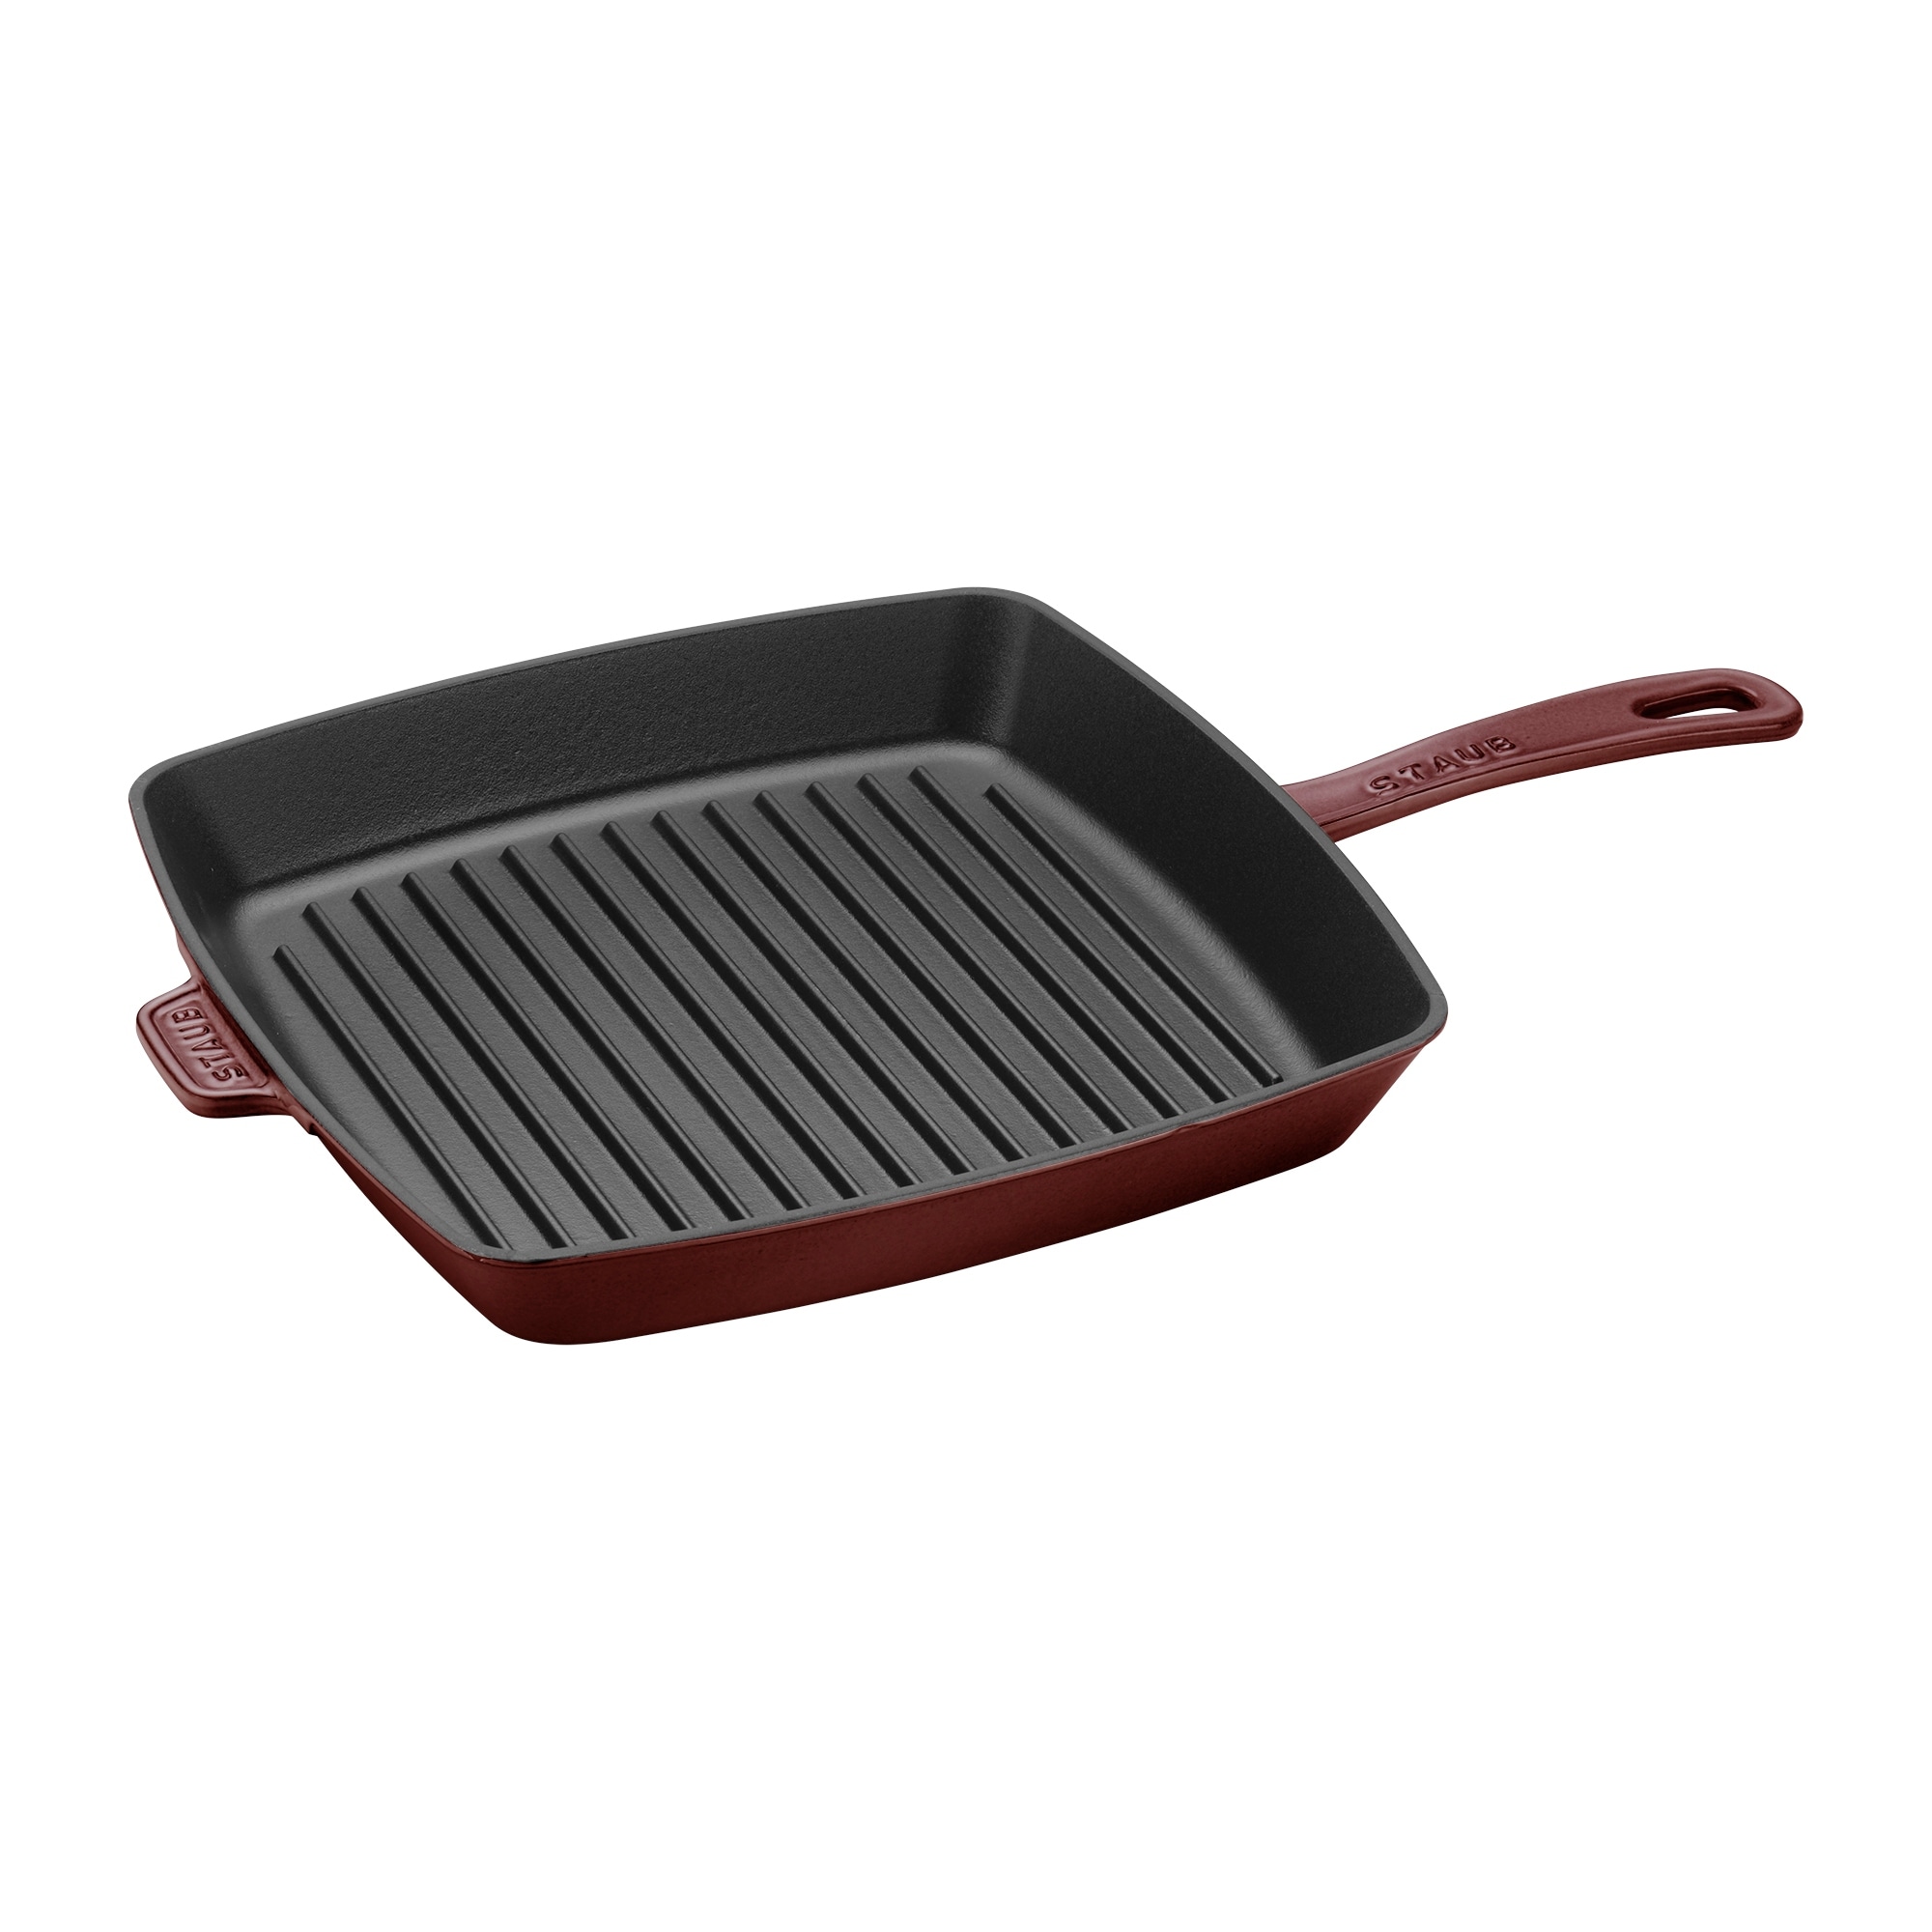 STAUB Cast Iron 12-inch Square Grill Pan Bed Bath  Beyond 33020473